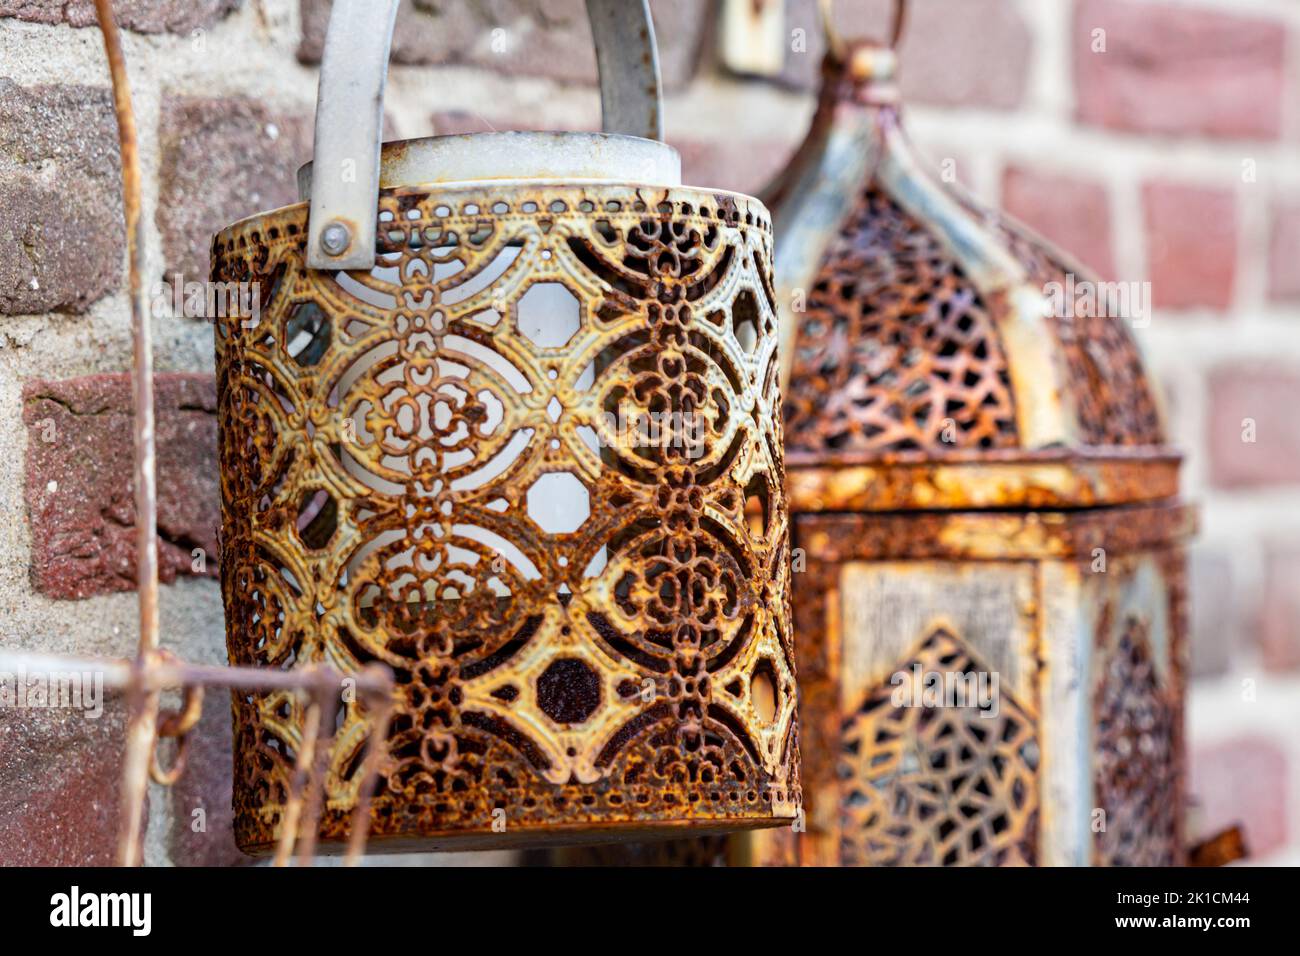 Rusted old lanterns on a rough brick wall Stock Photo